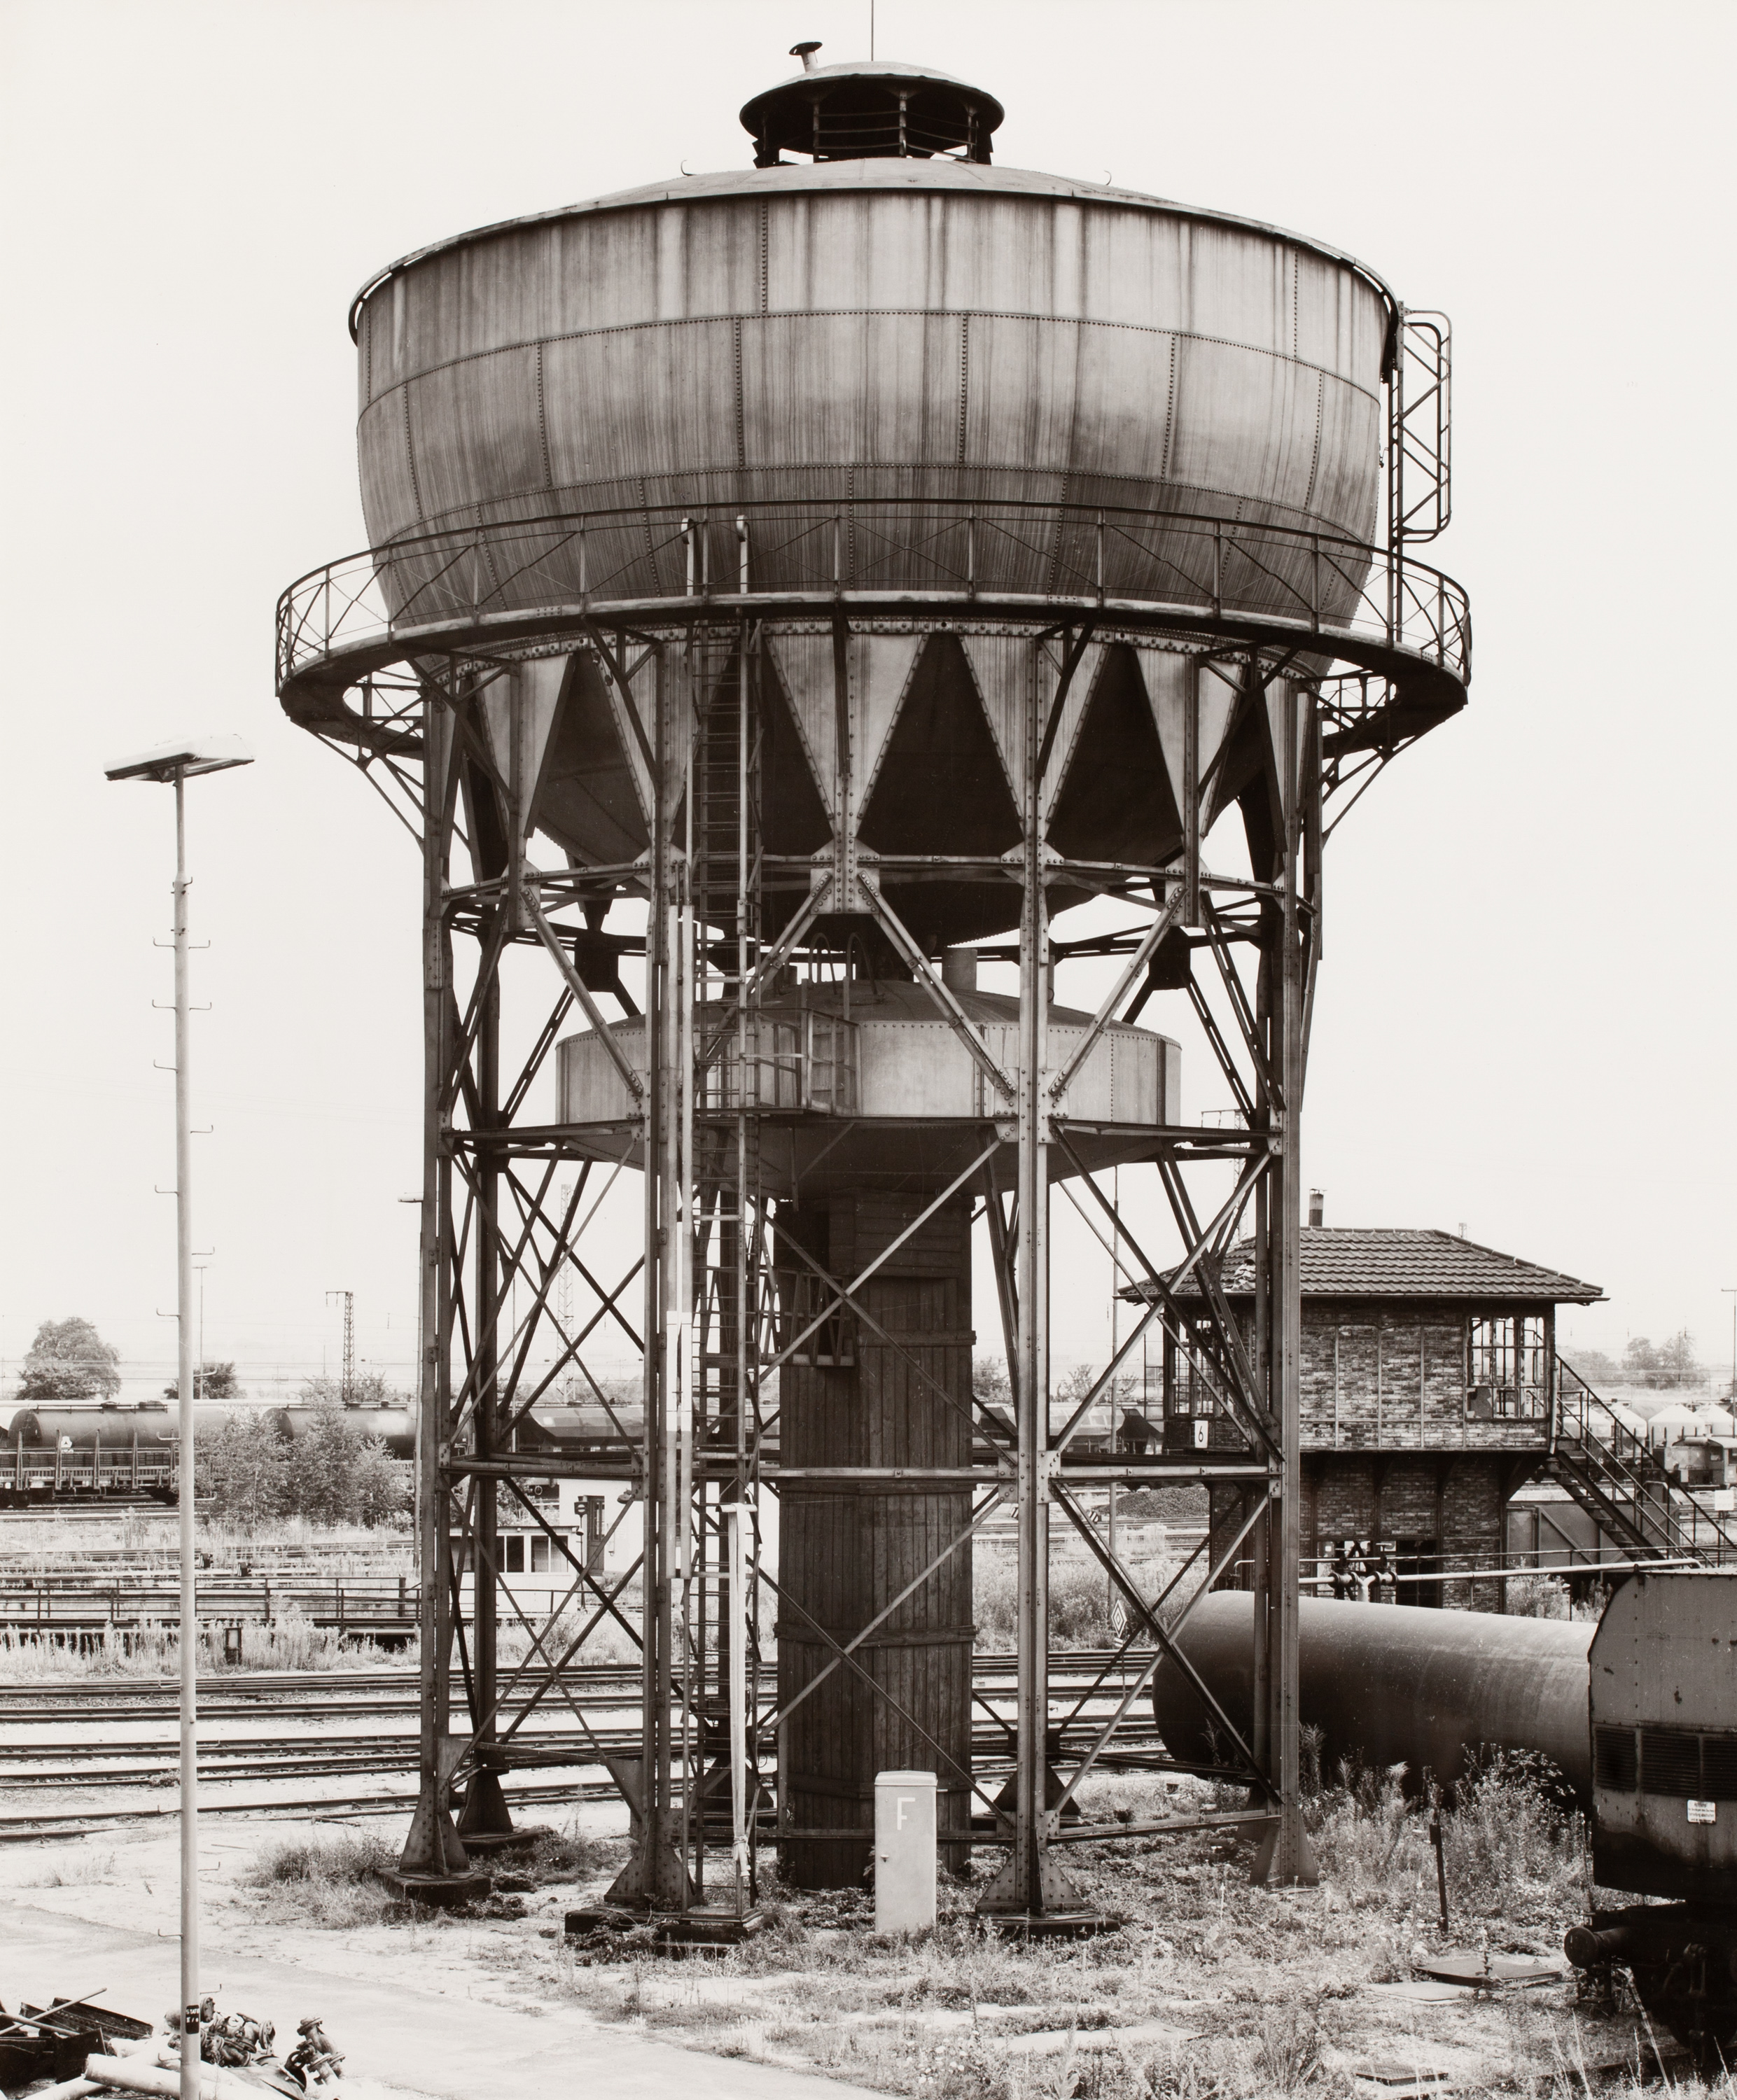 Black and white photograph of a water tower near railroad tracks